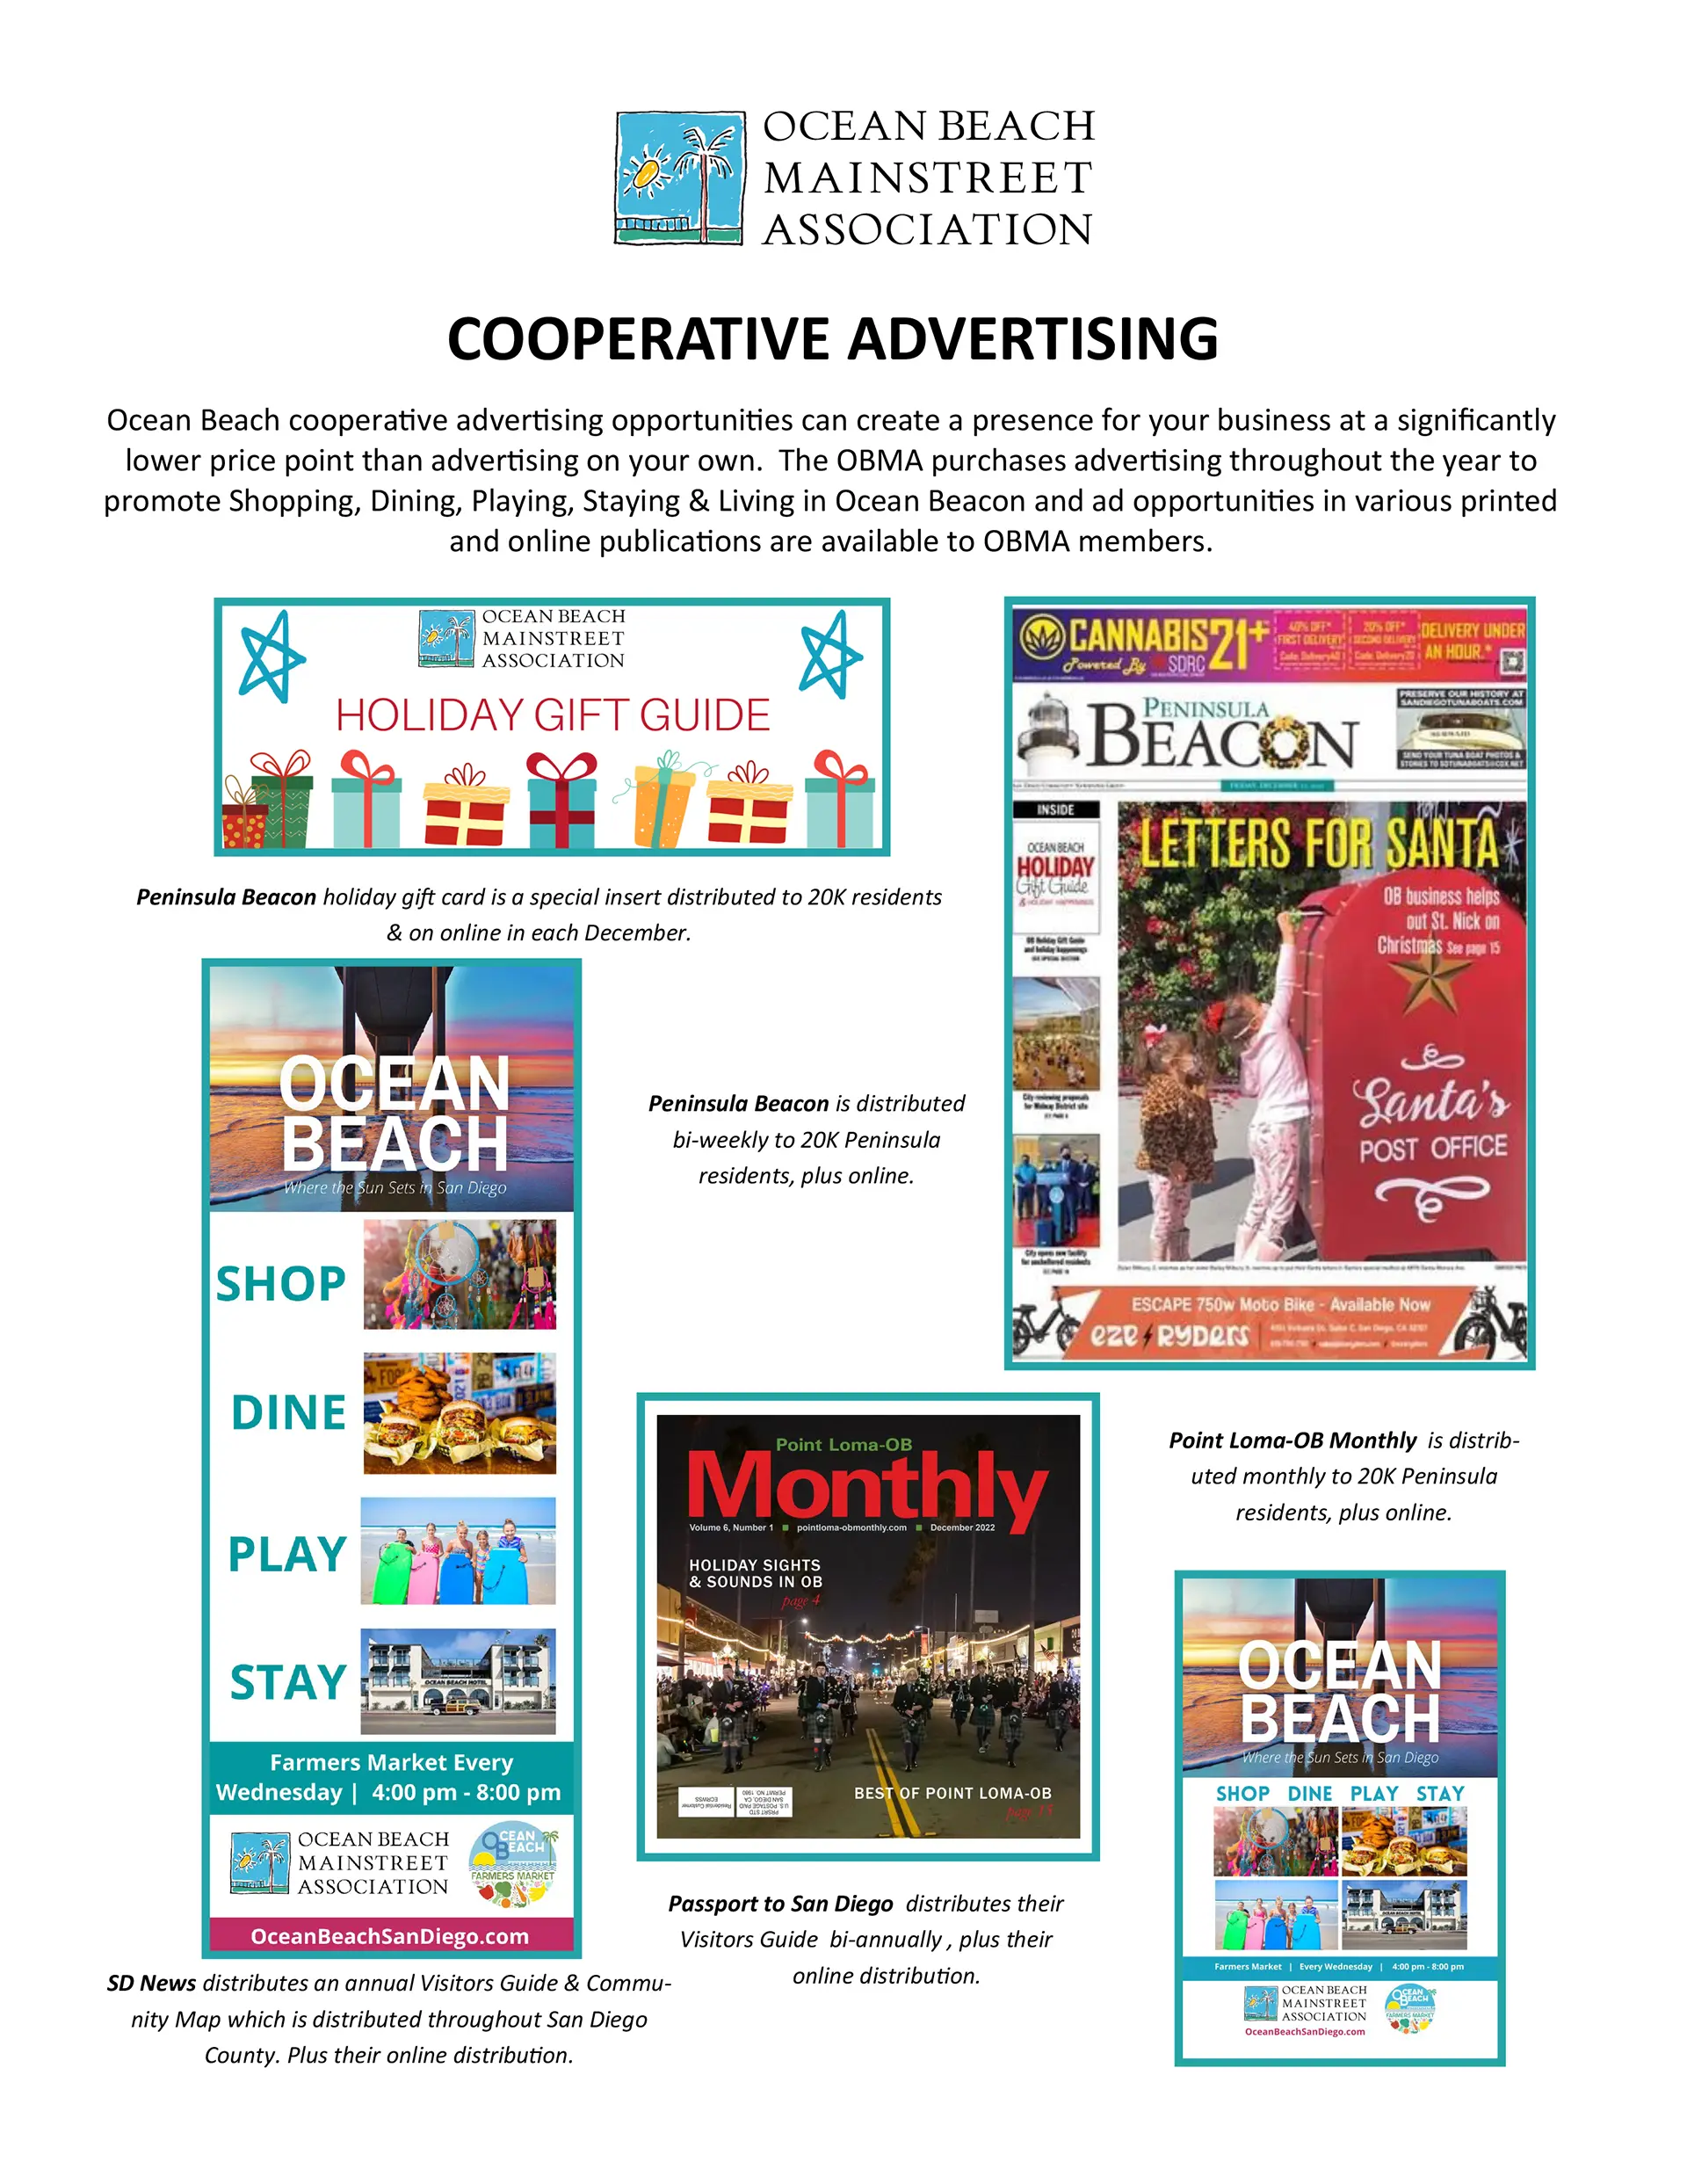 OBMA Cooperative Advertising Opportunities